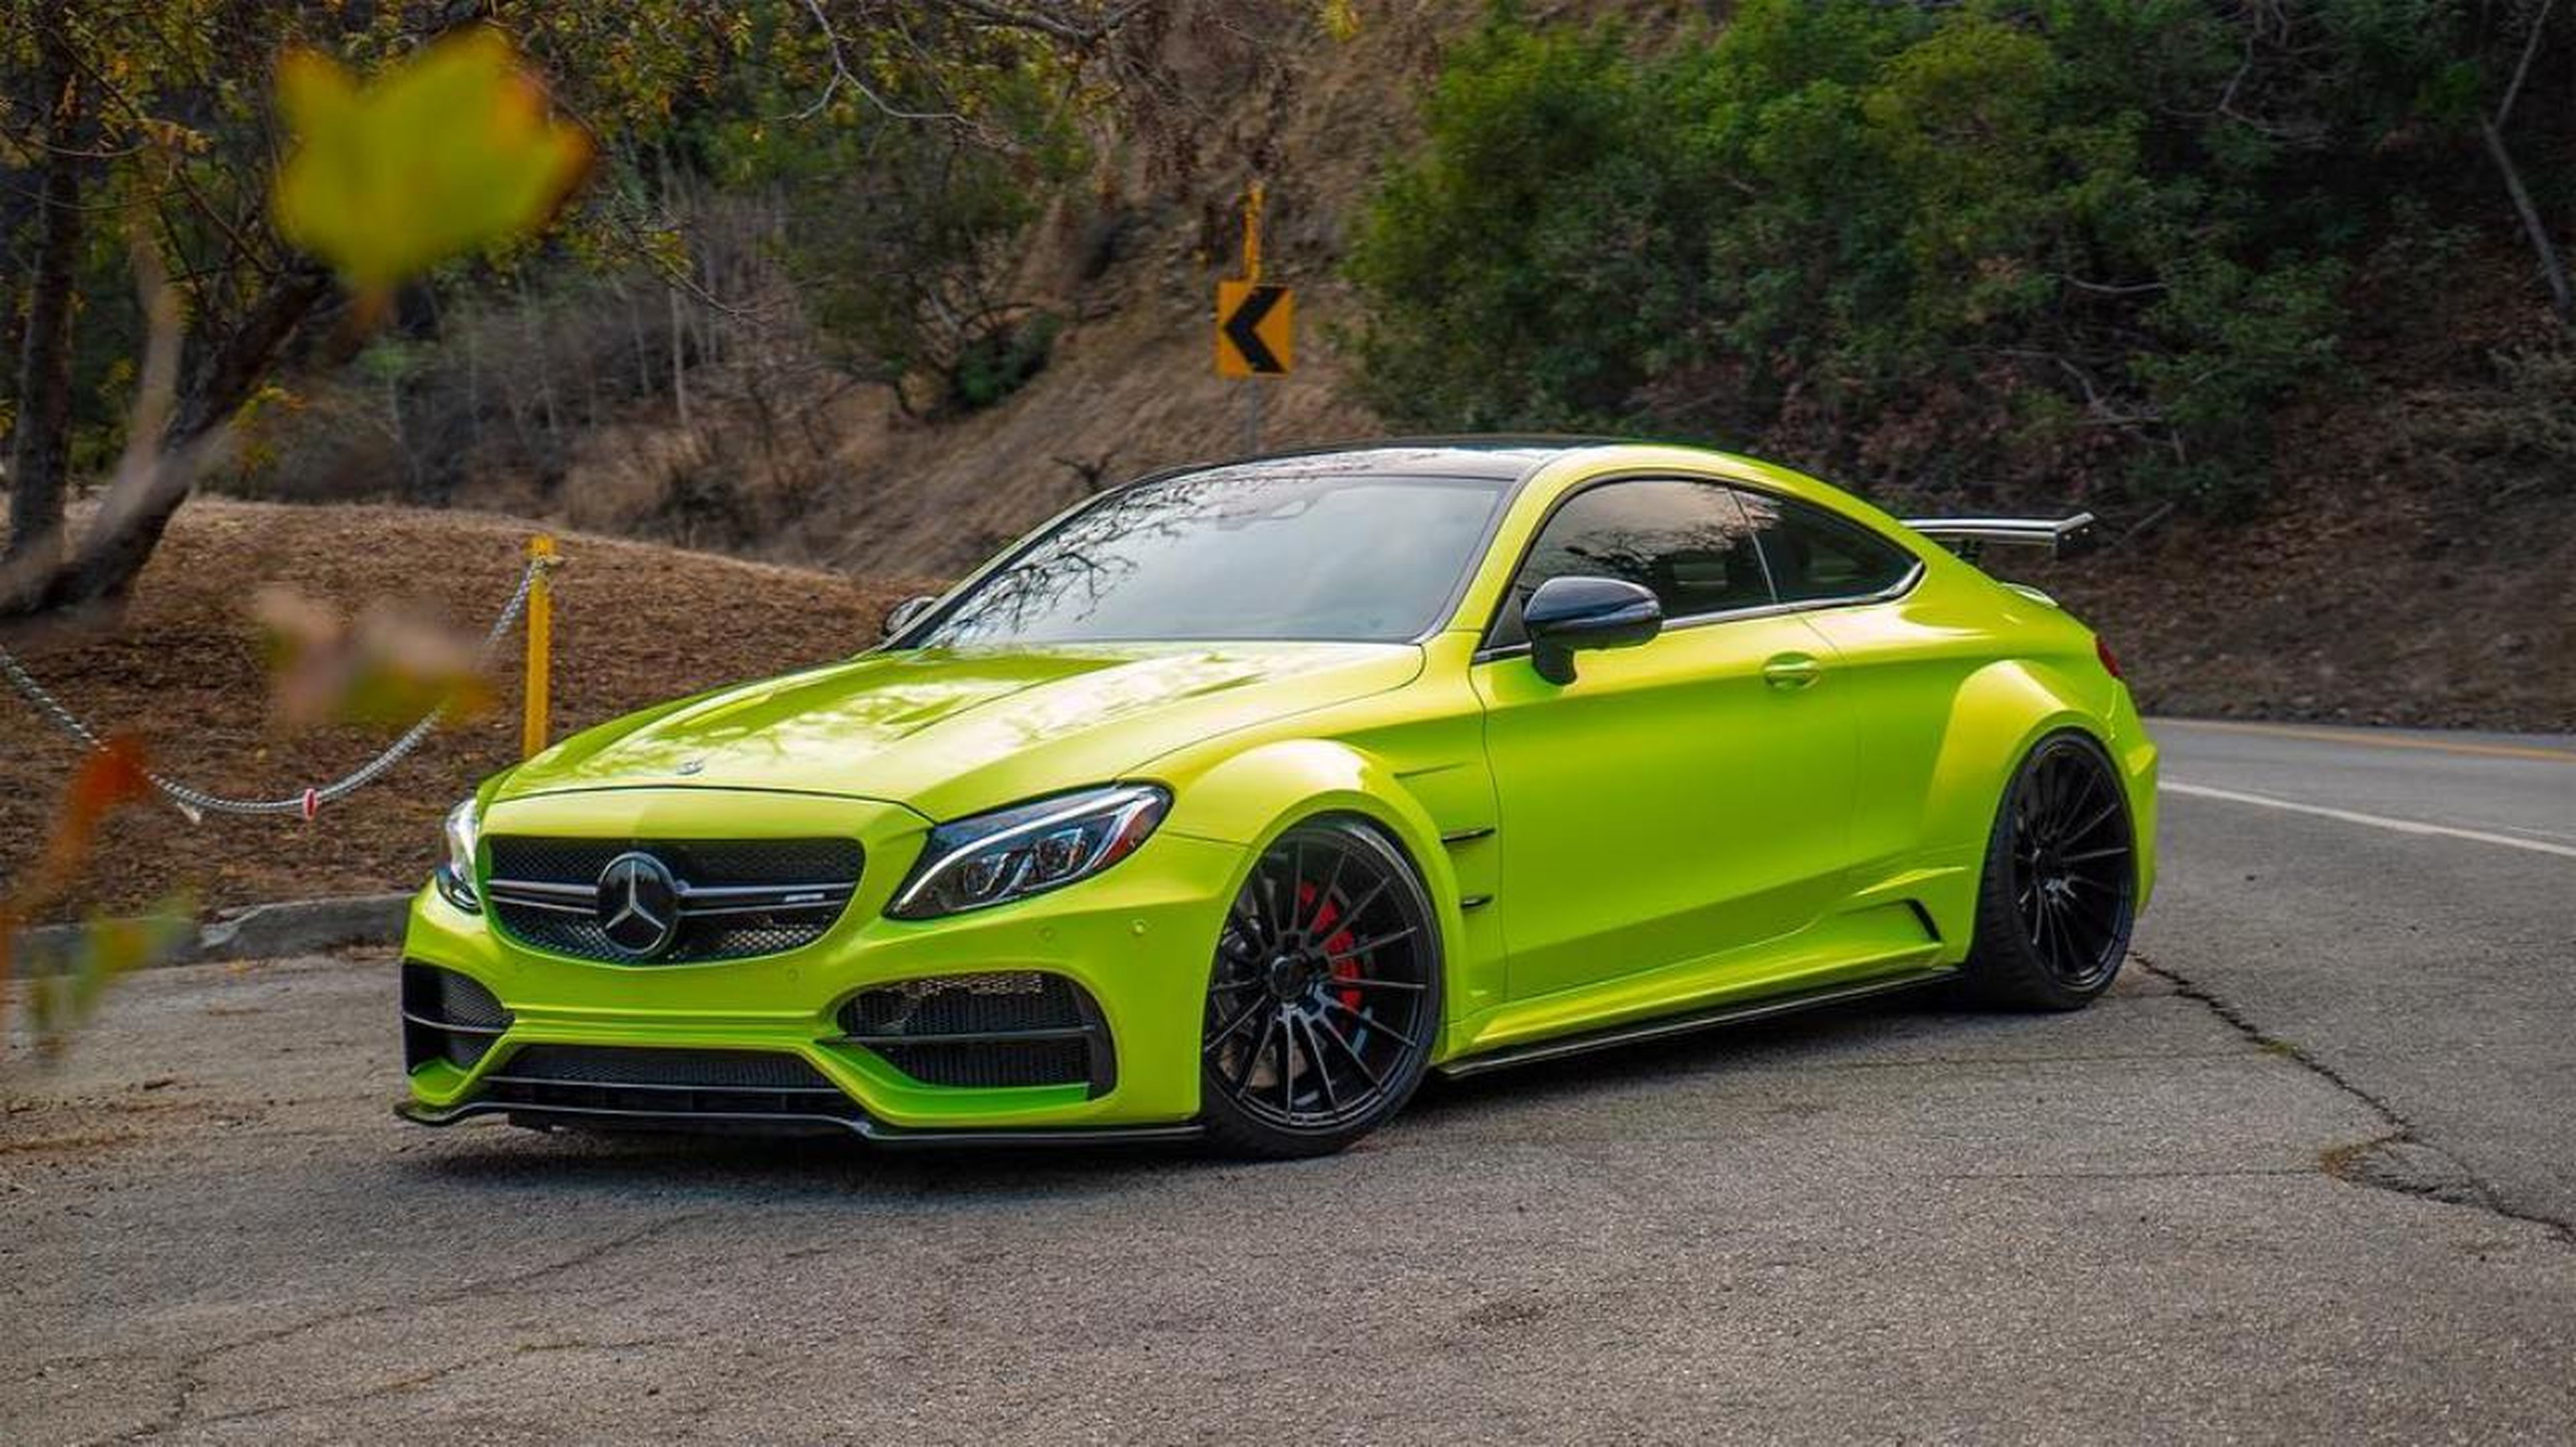 Mercedes-AMG C63 S Coupe by RDBLA